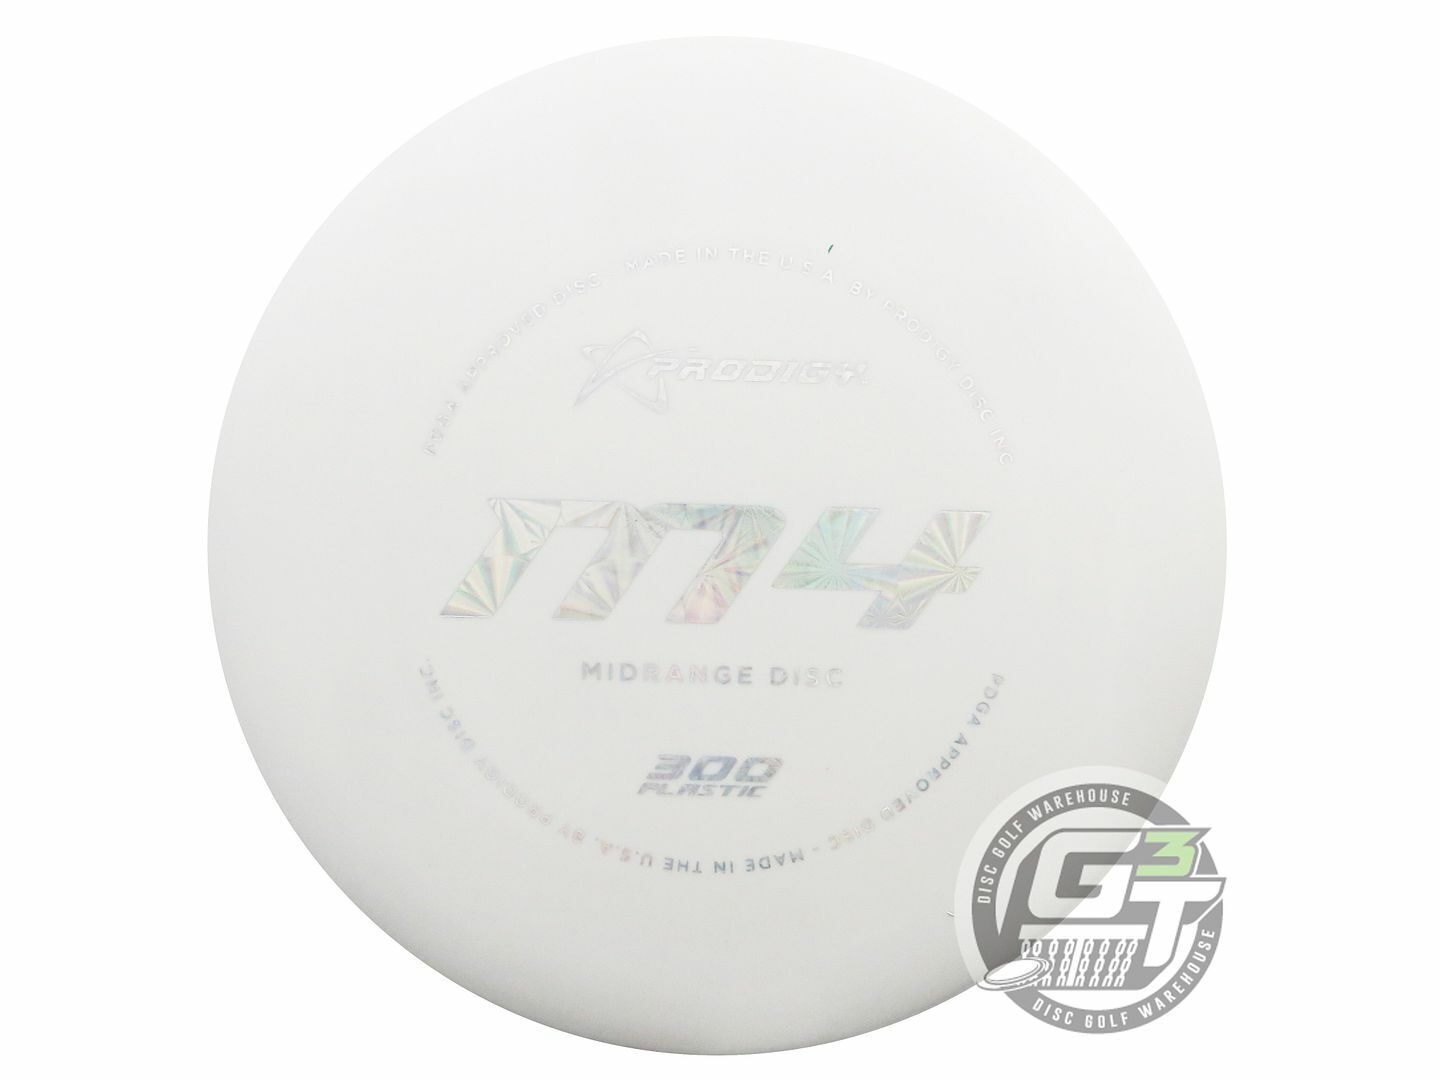 Prodigy 300 Series M4 Midrange Golf Disc (Individually Listed)